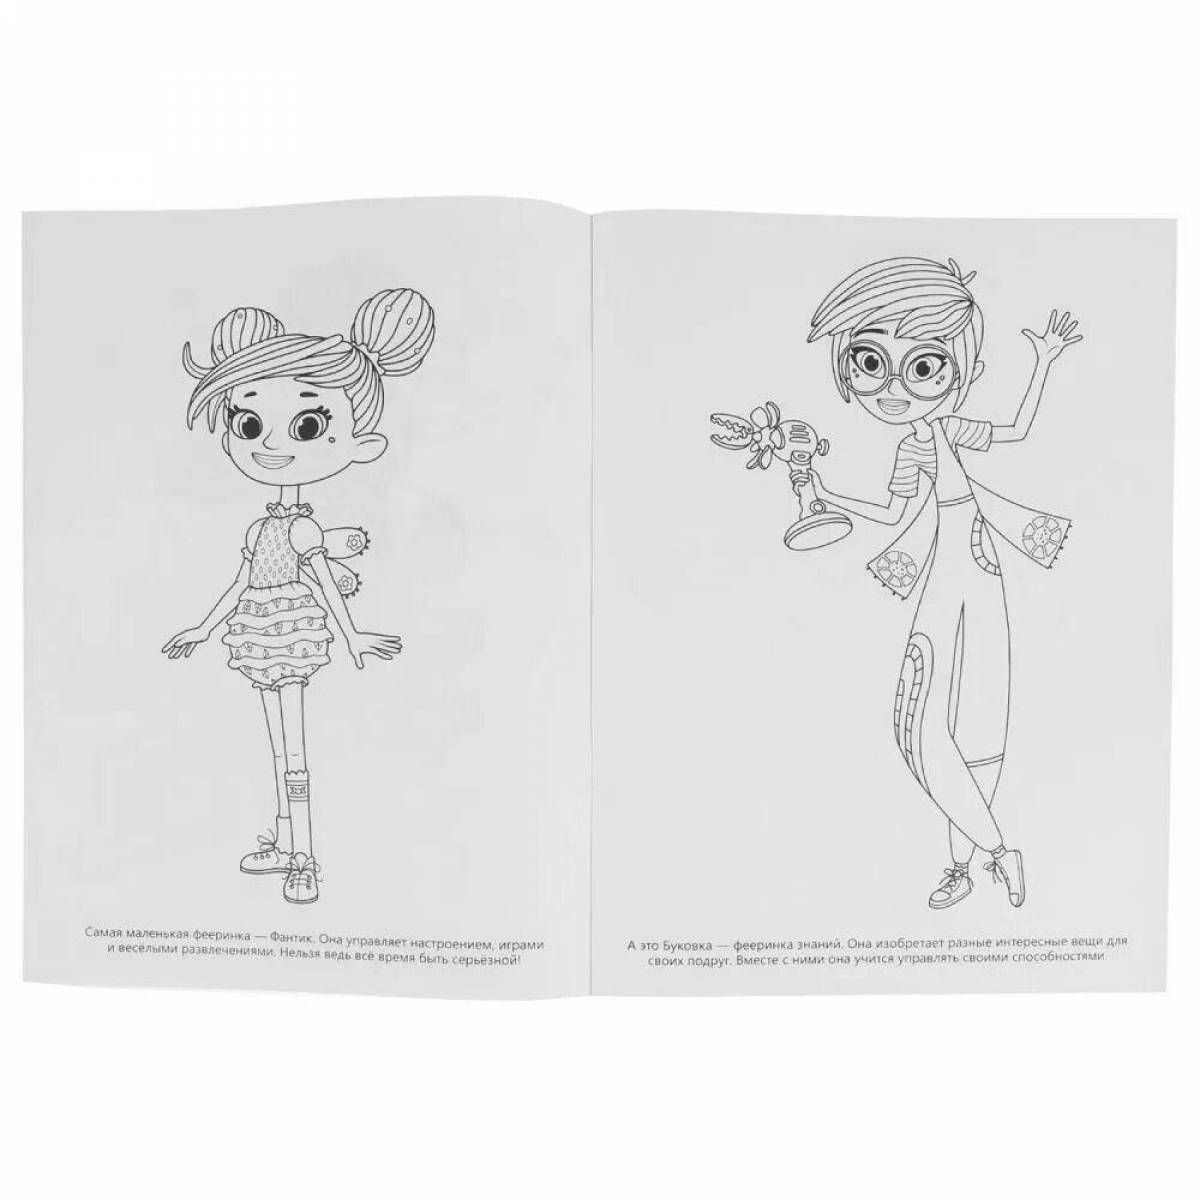 Fabulous cartoon coloring pages